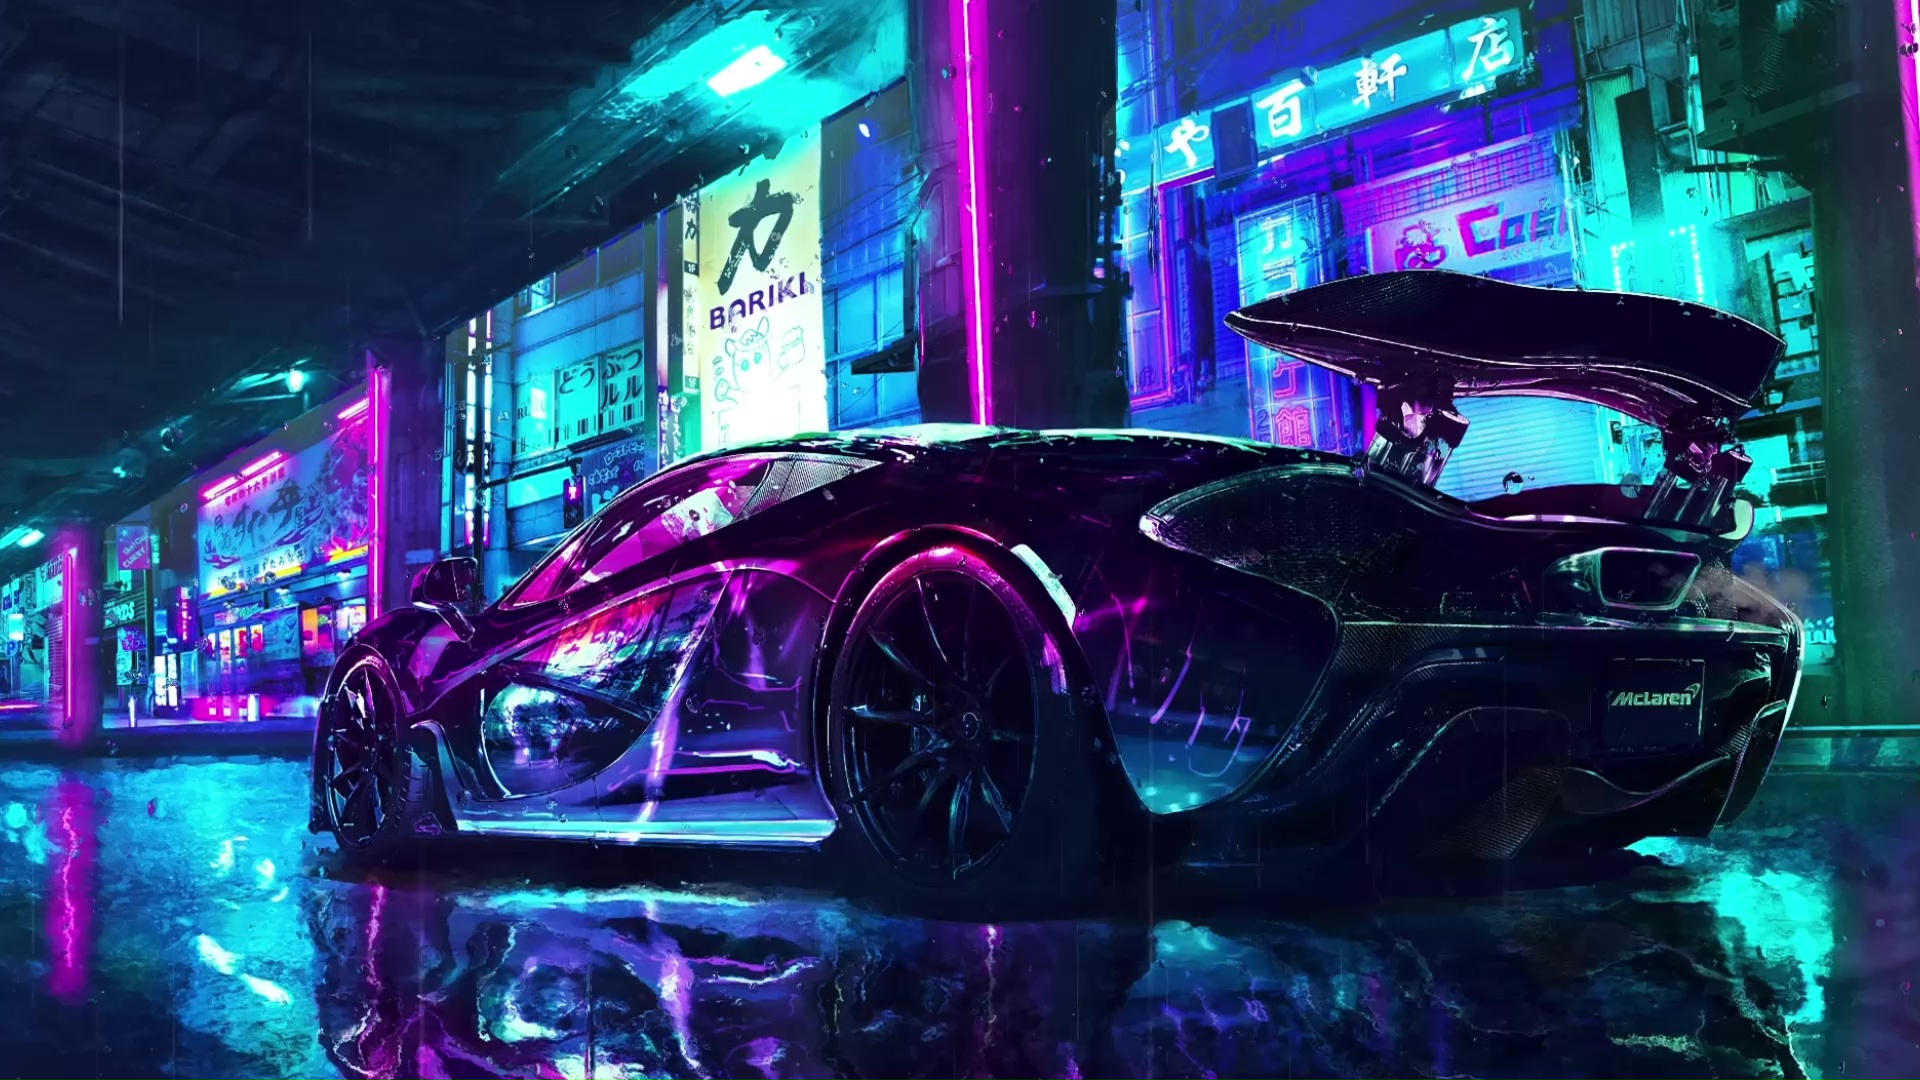 Sci-Fi Futuristic Cyberpunk Neon City Street Panoramic Scenic Art  Illustration. Science Fiction Future Cyber Punk Cityscape Background. CG  Digital Painting AI Neural Network Generated Art Wallpaper Stock Photo,  Picture and Royalty Free